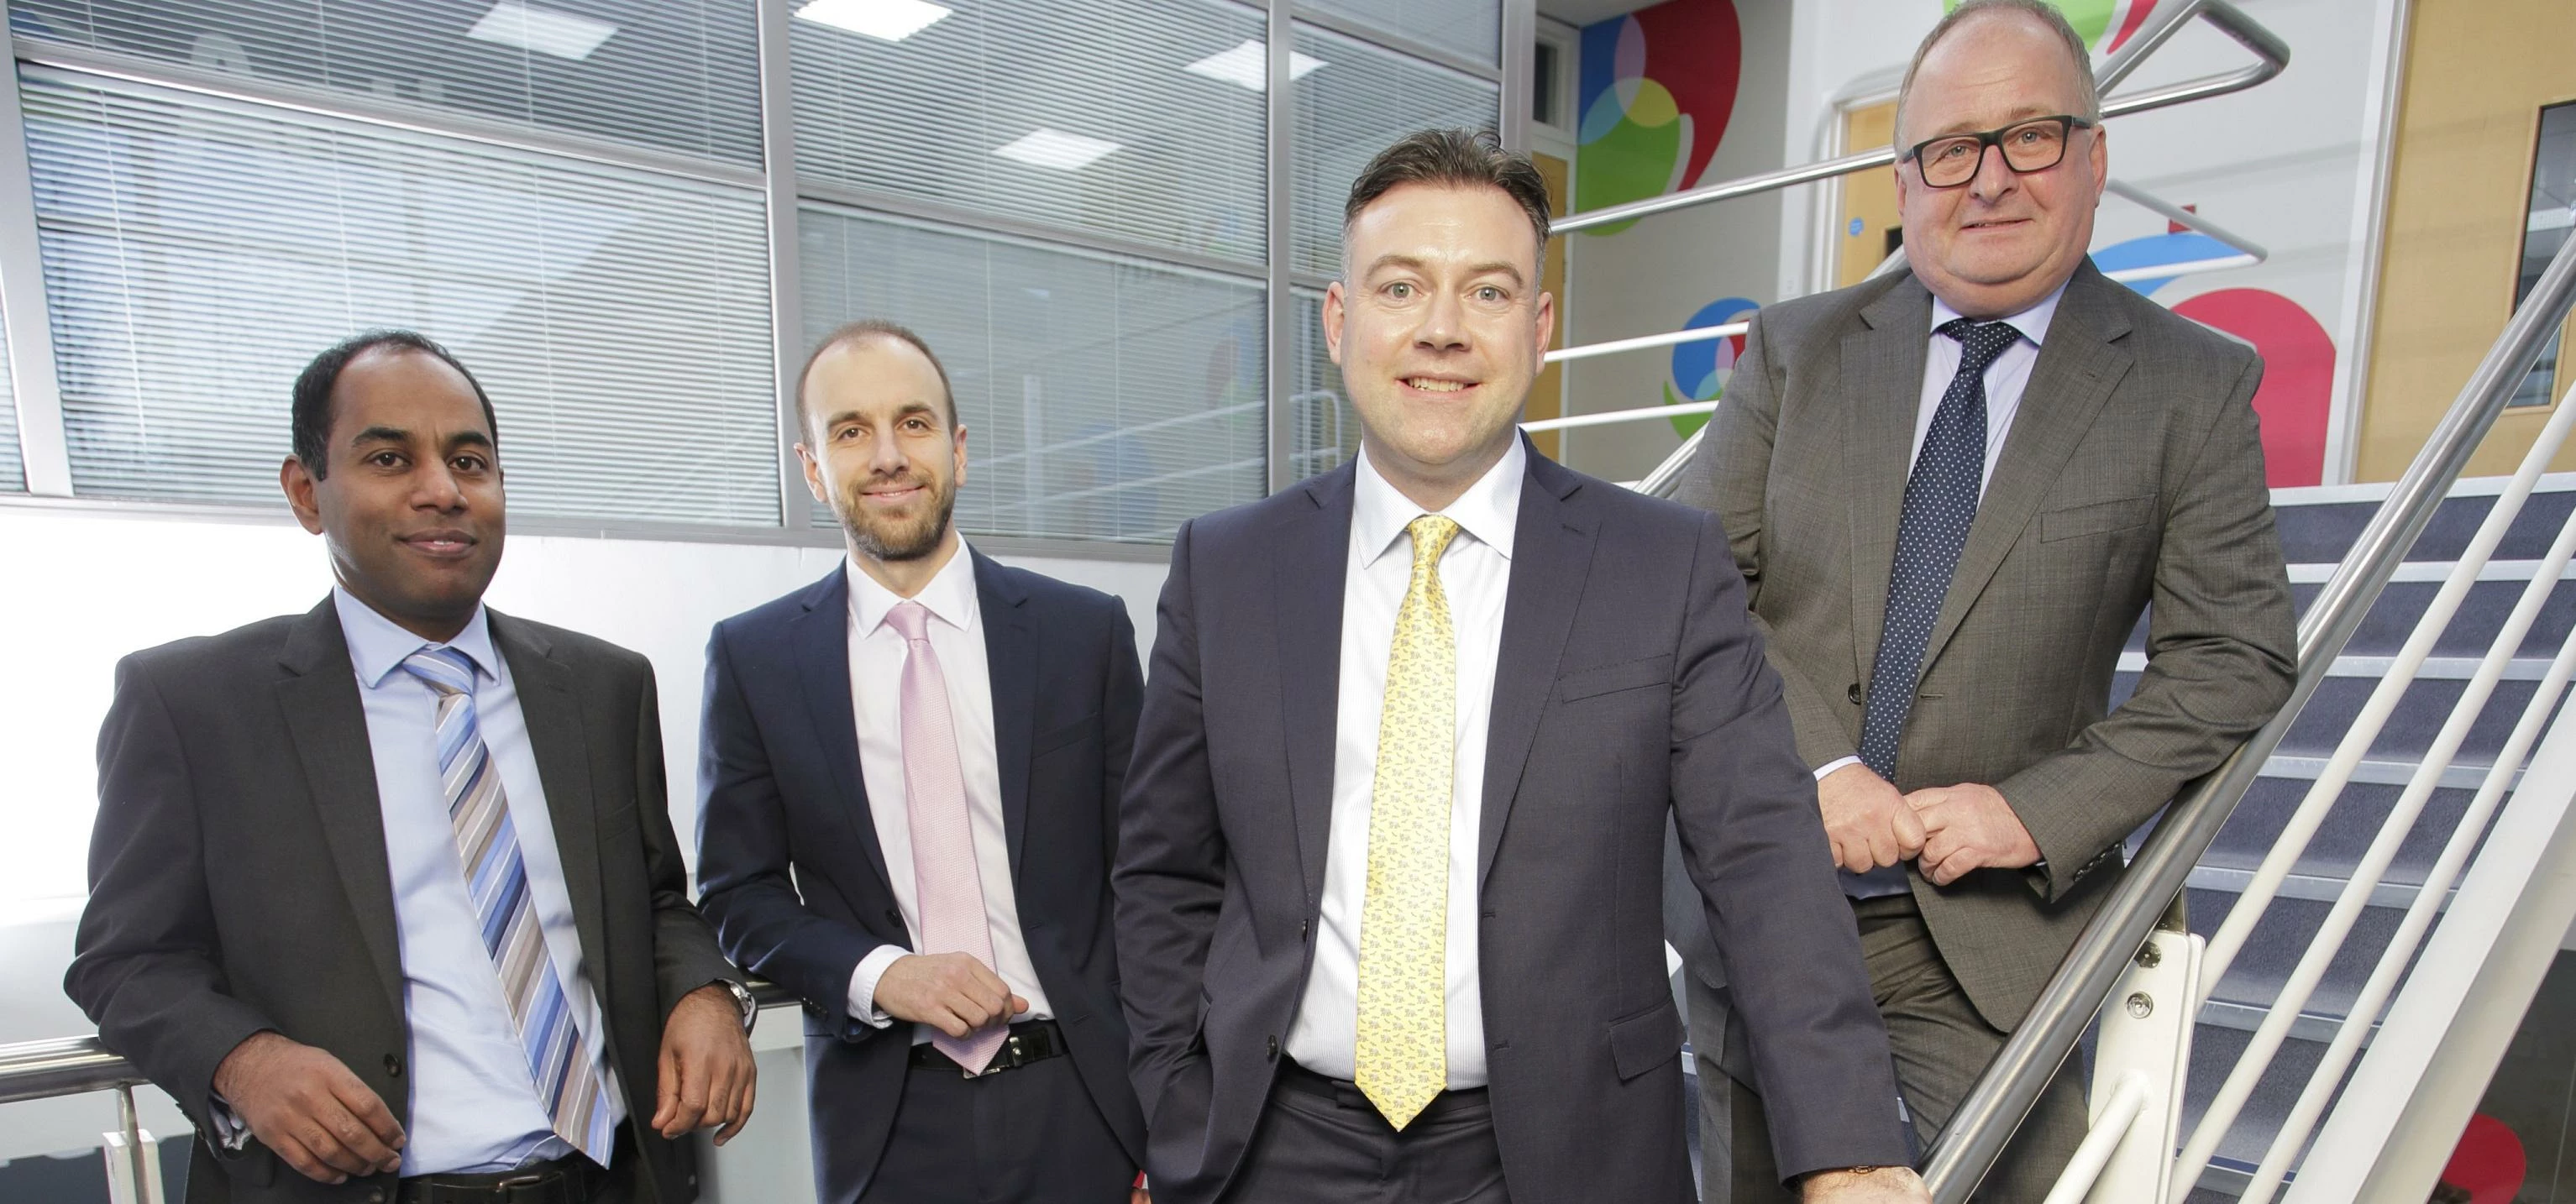 L-R: Kevin Maloney (Muckle, John Healey (UNW), Michael Vassallo (FW Capital) and Ian Gillespie (Acti